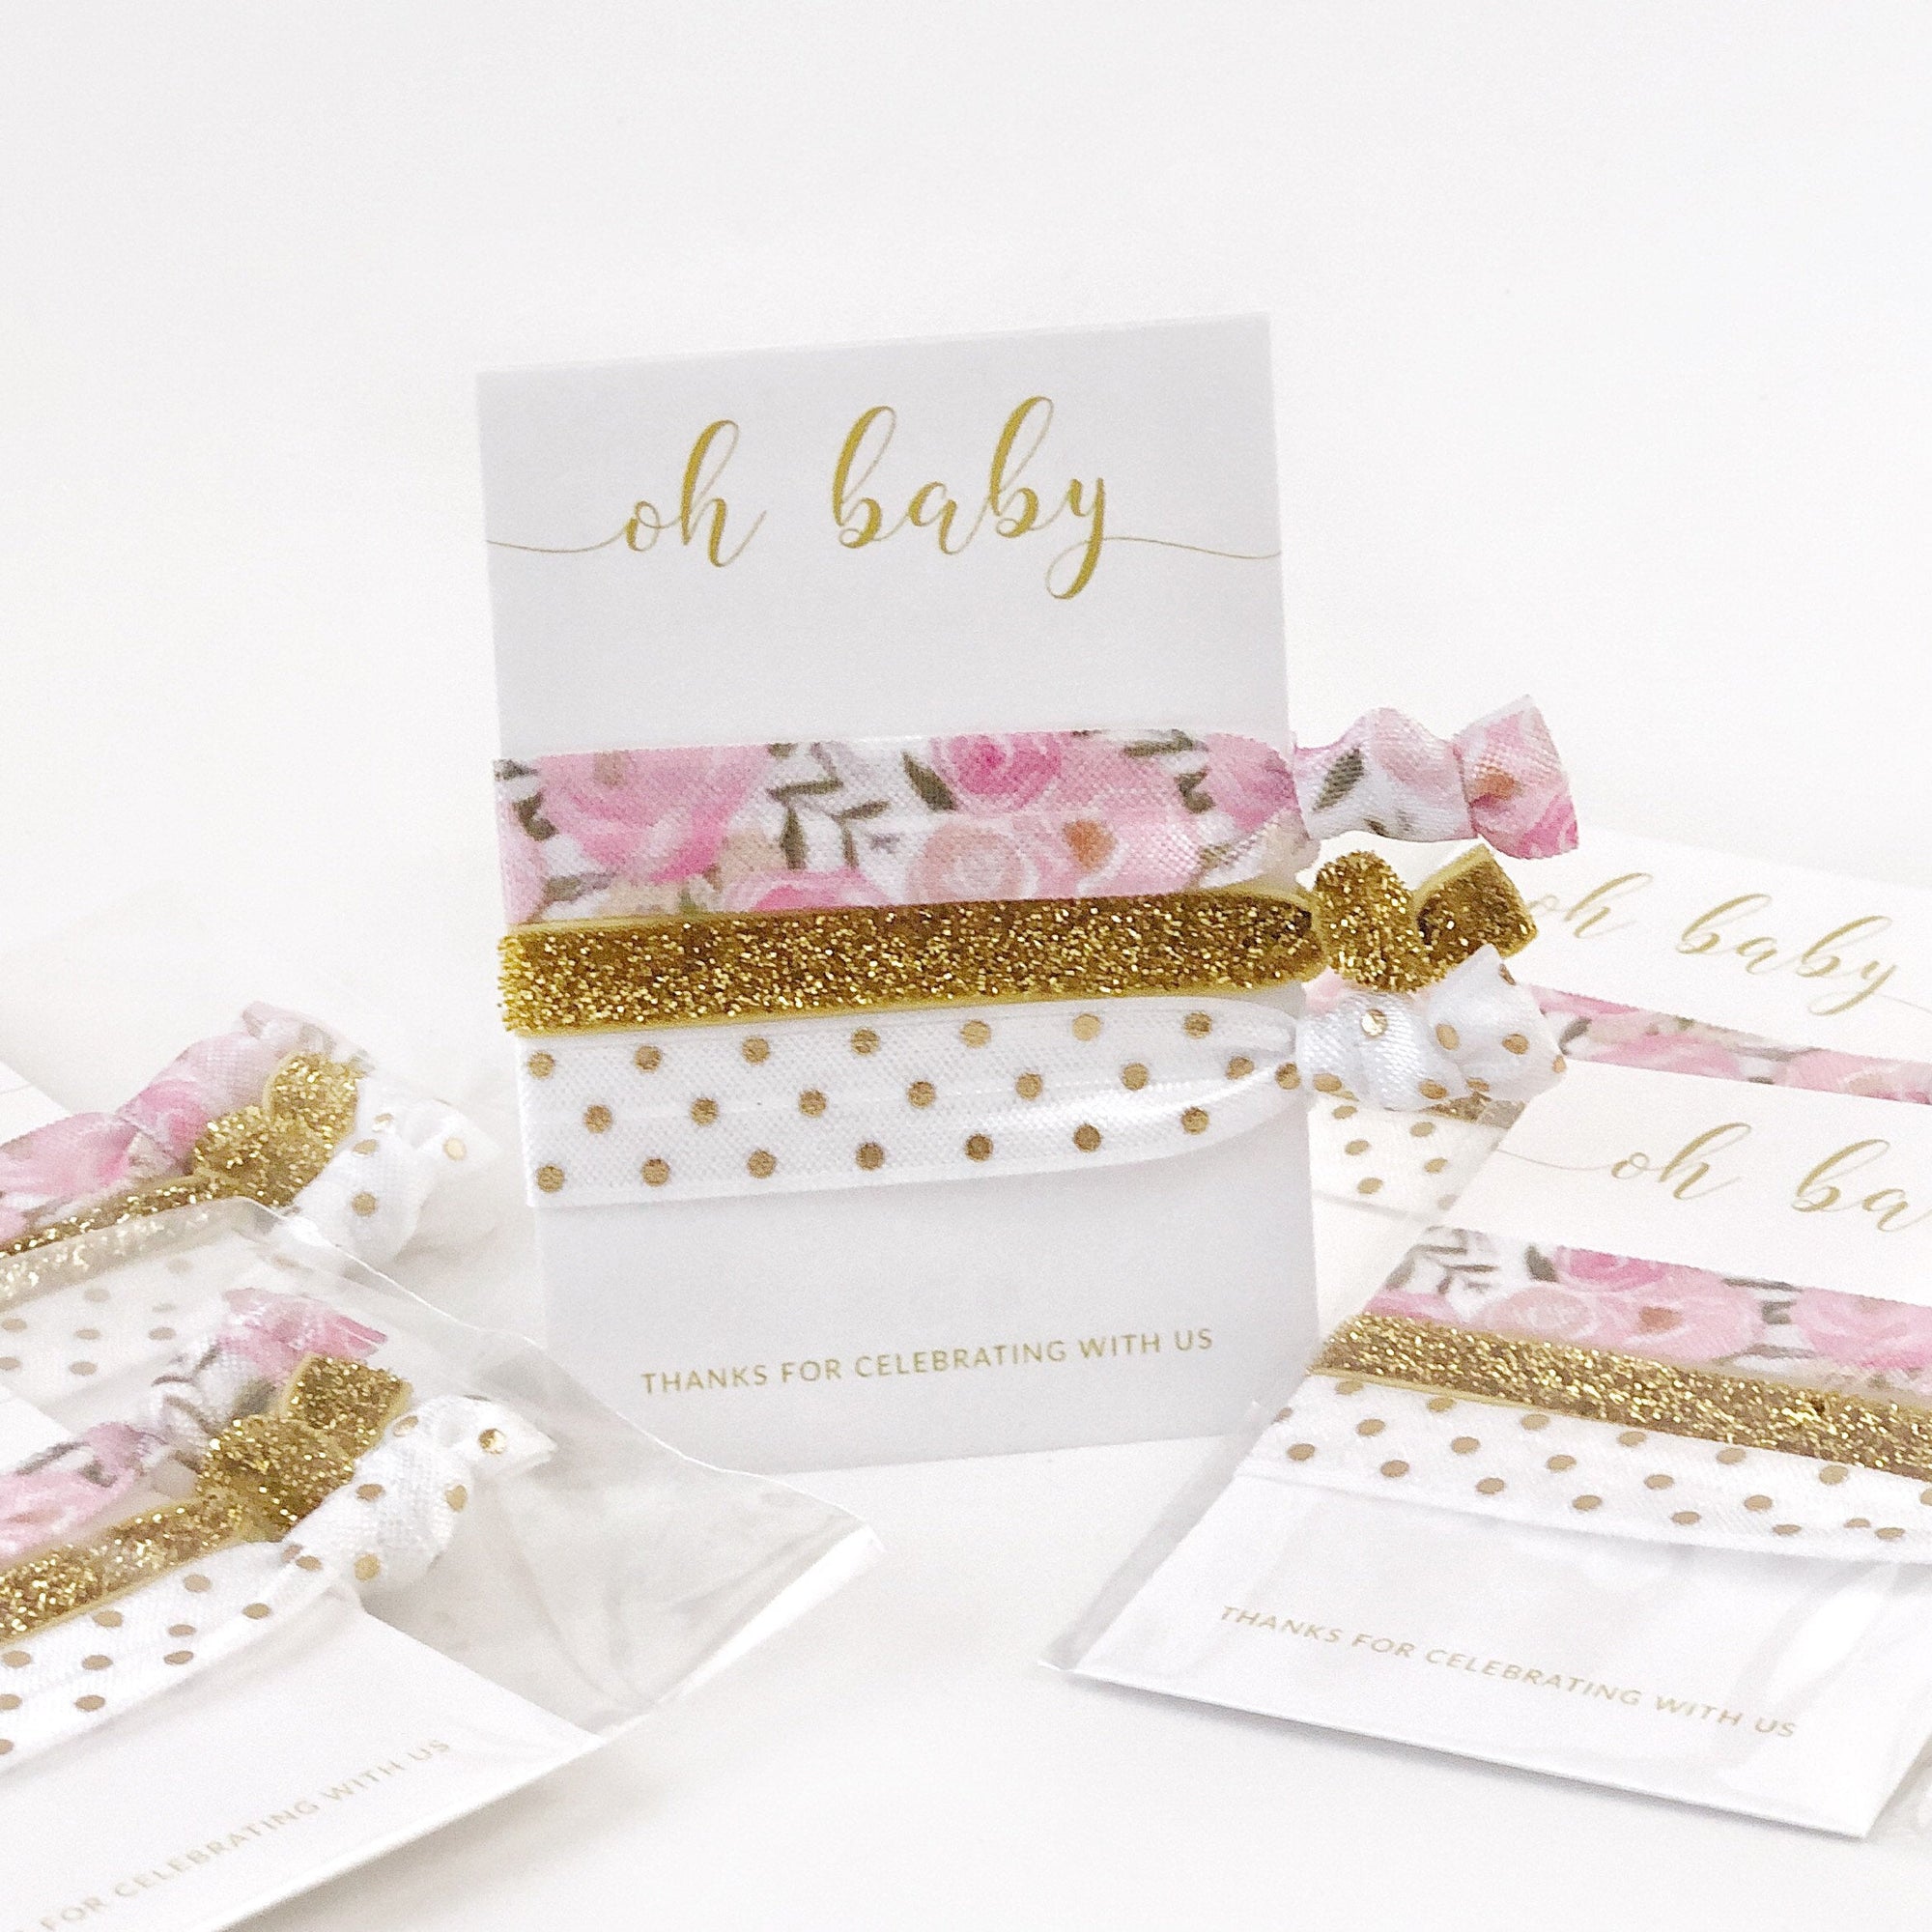 Floral Baby Shower Favors Hair Ties, Unique Baby Shower Favors, Tea Party Baby Shower Favors, Gold Baby Shower Hair Ties - FR100 - @PlumPolkaDot 